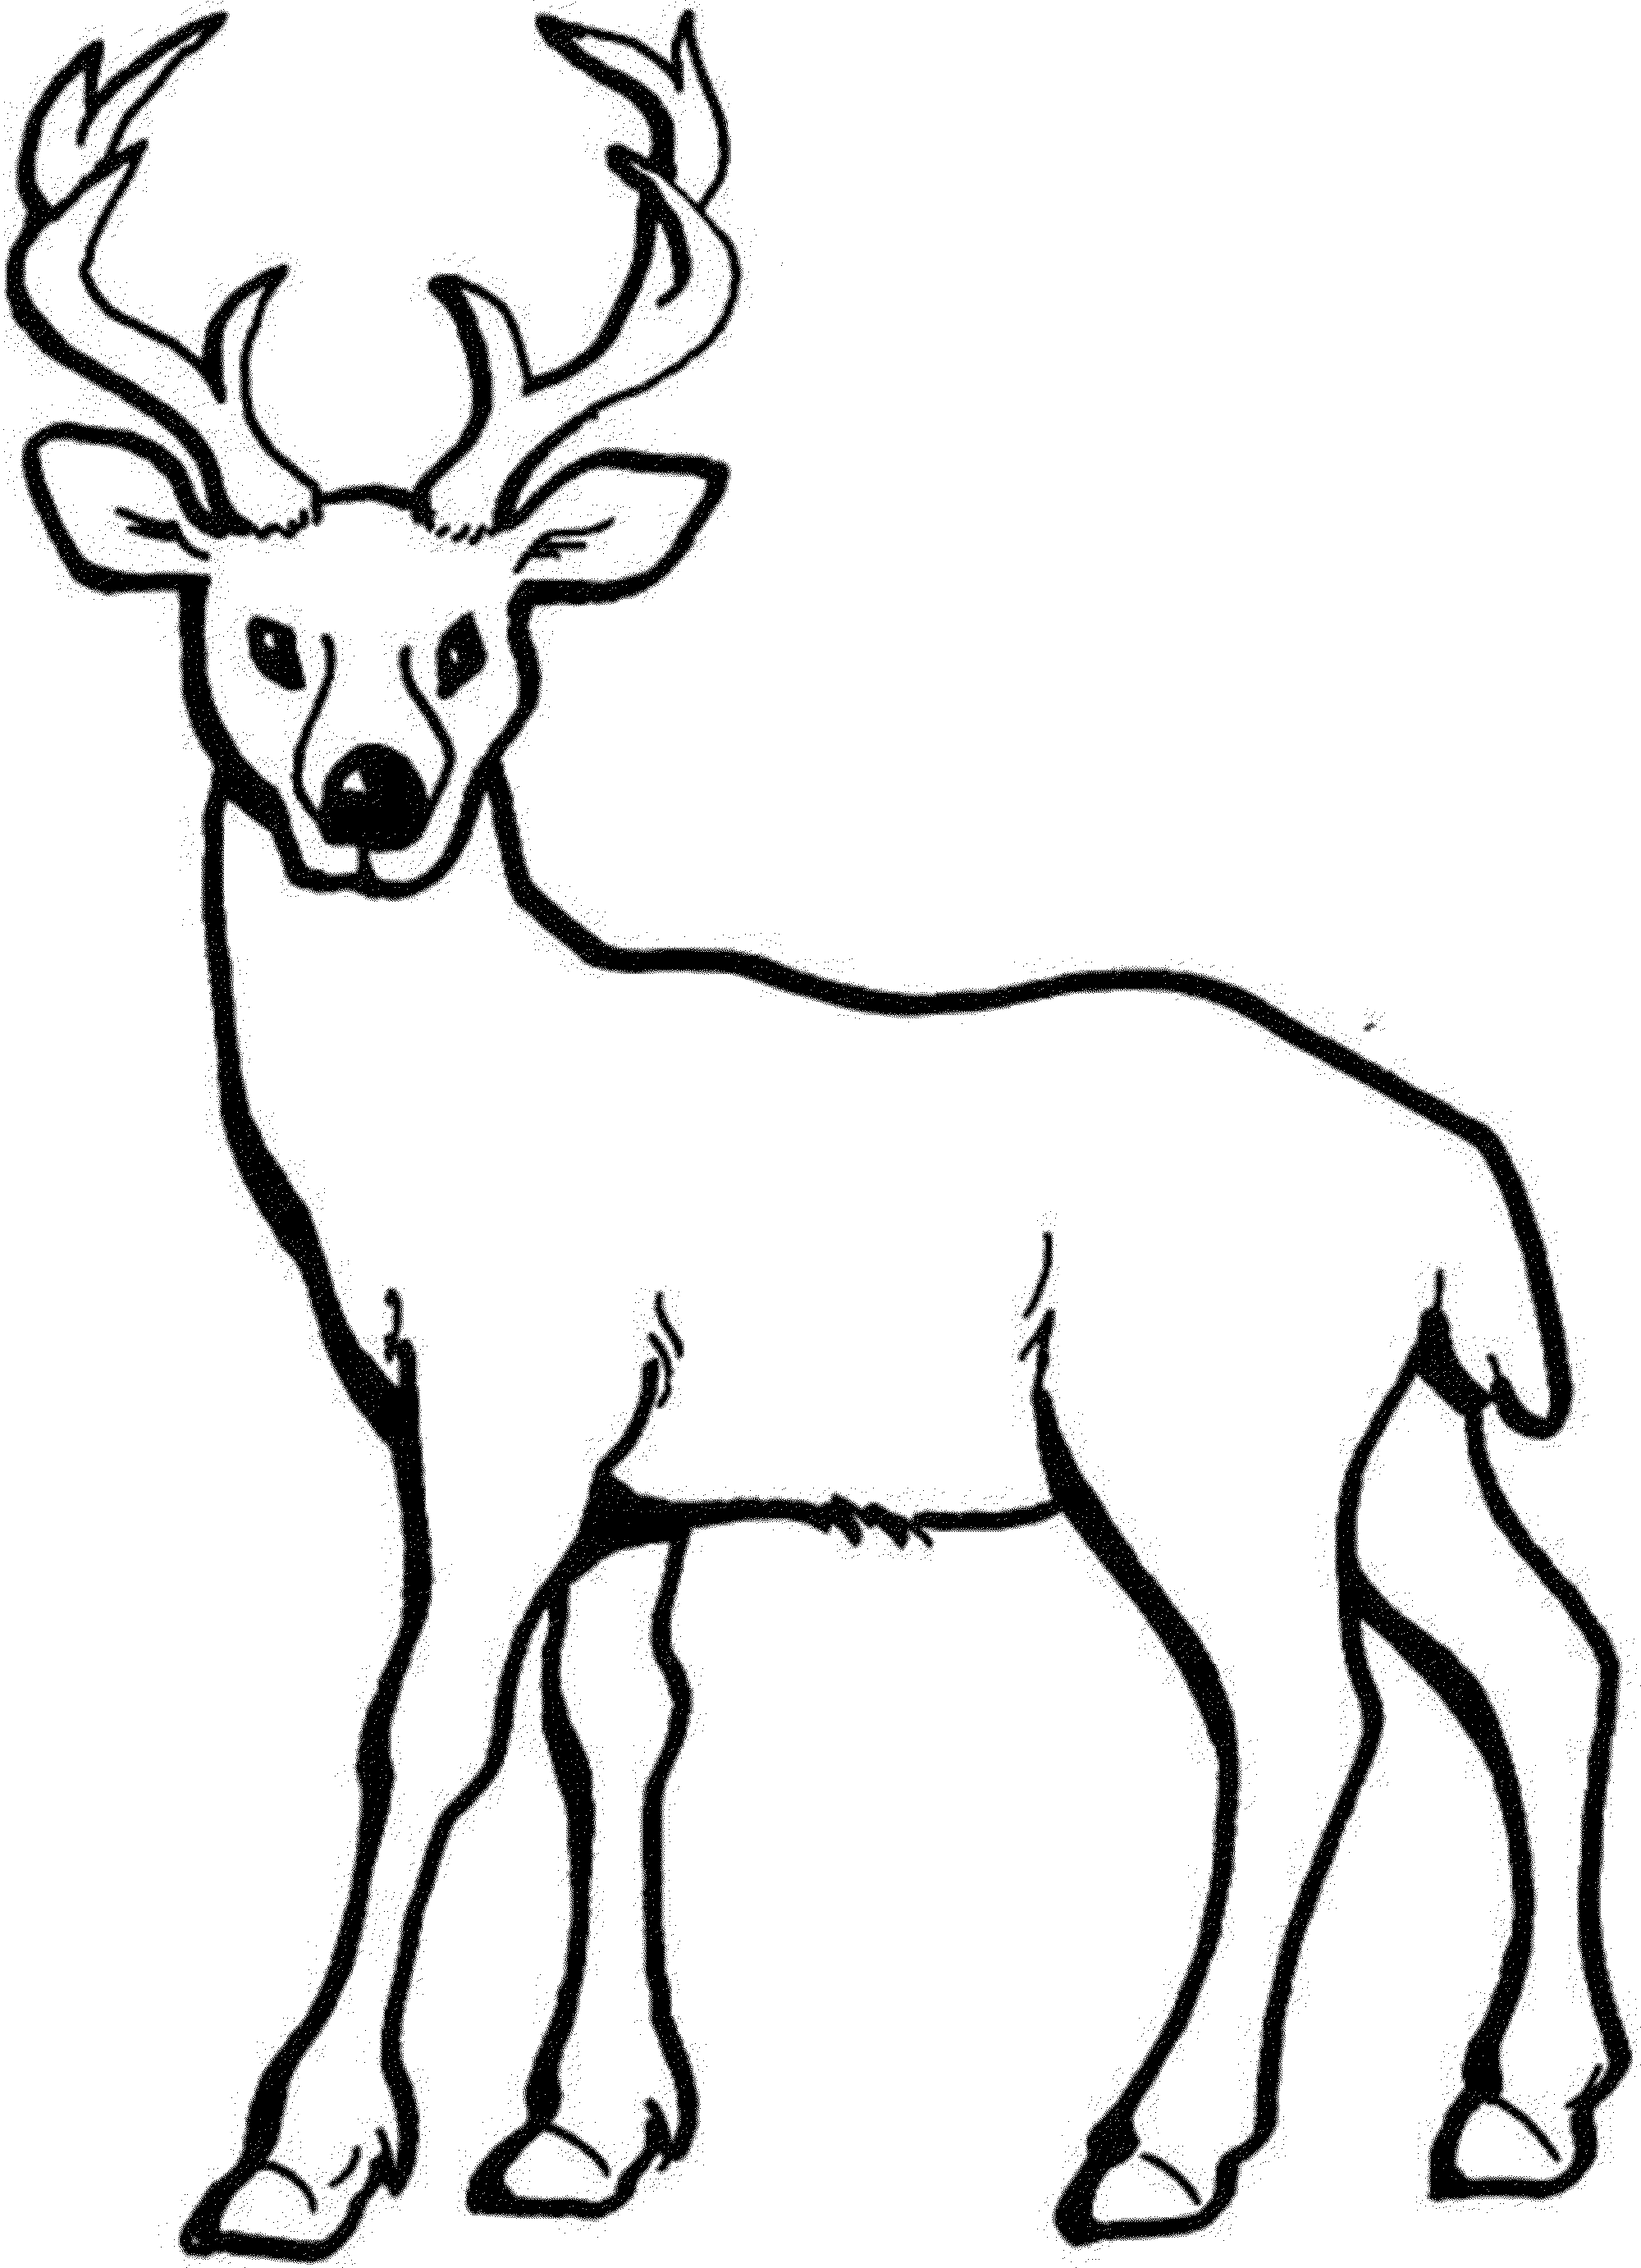 Coloring page: Deer (Animals) #2581 - Printable coloring pages